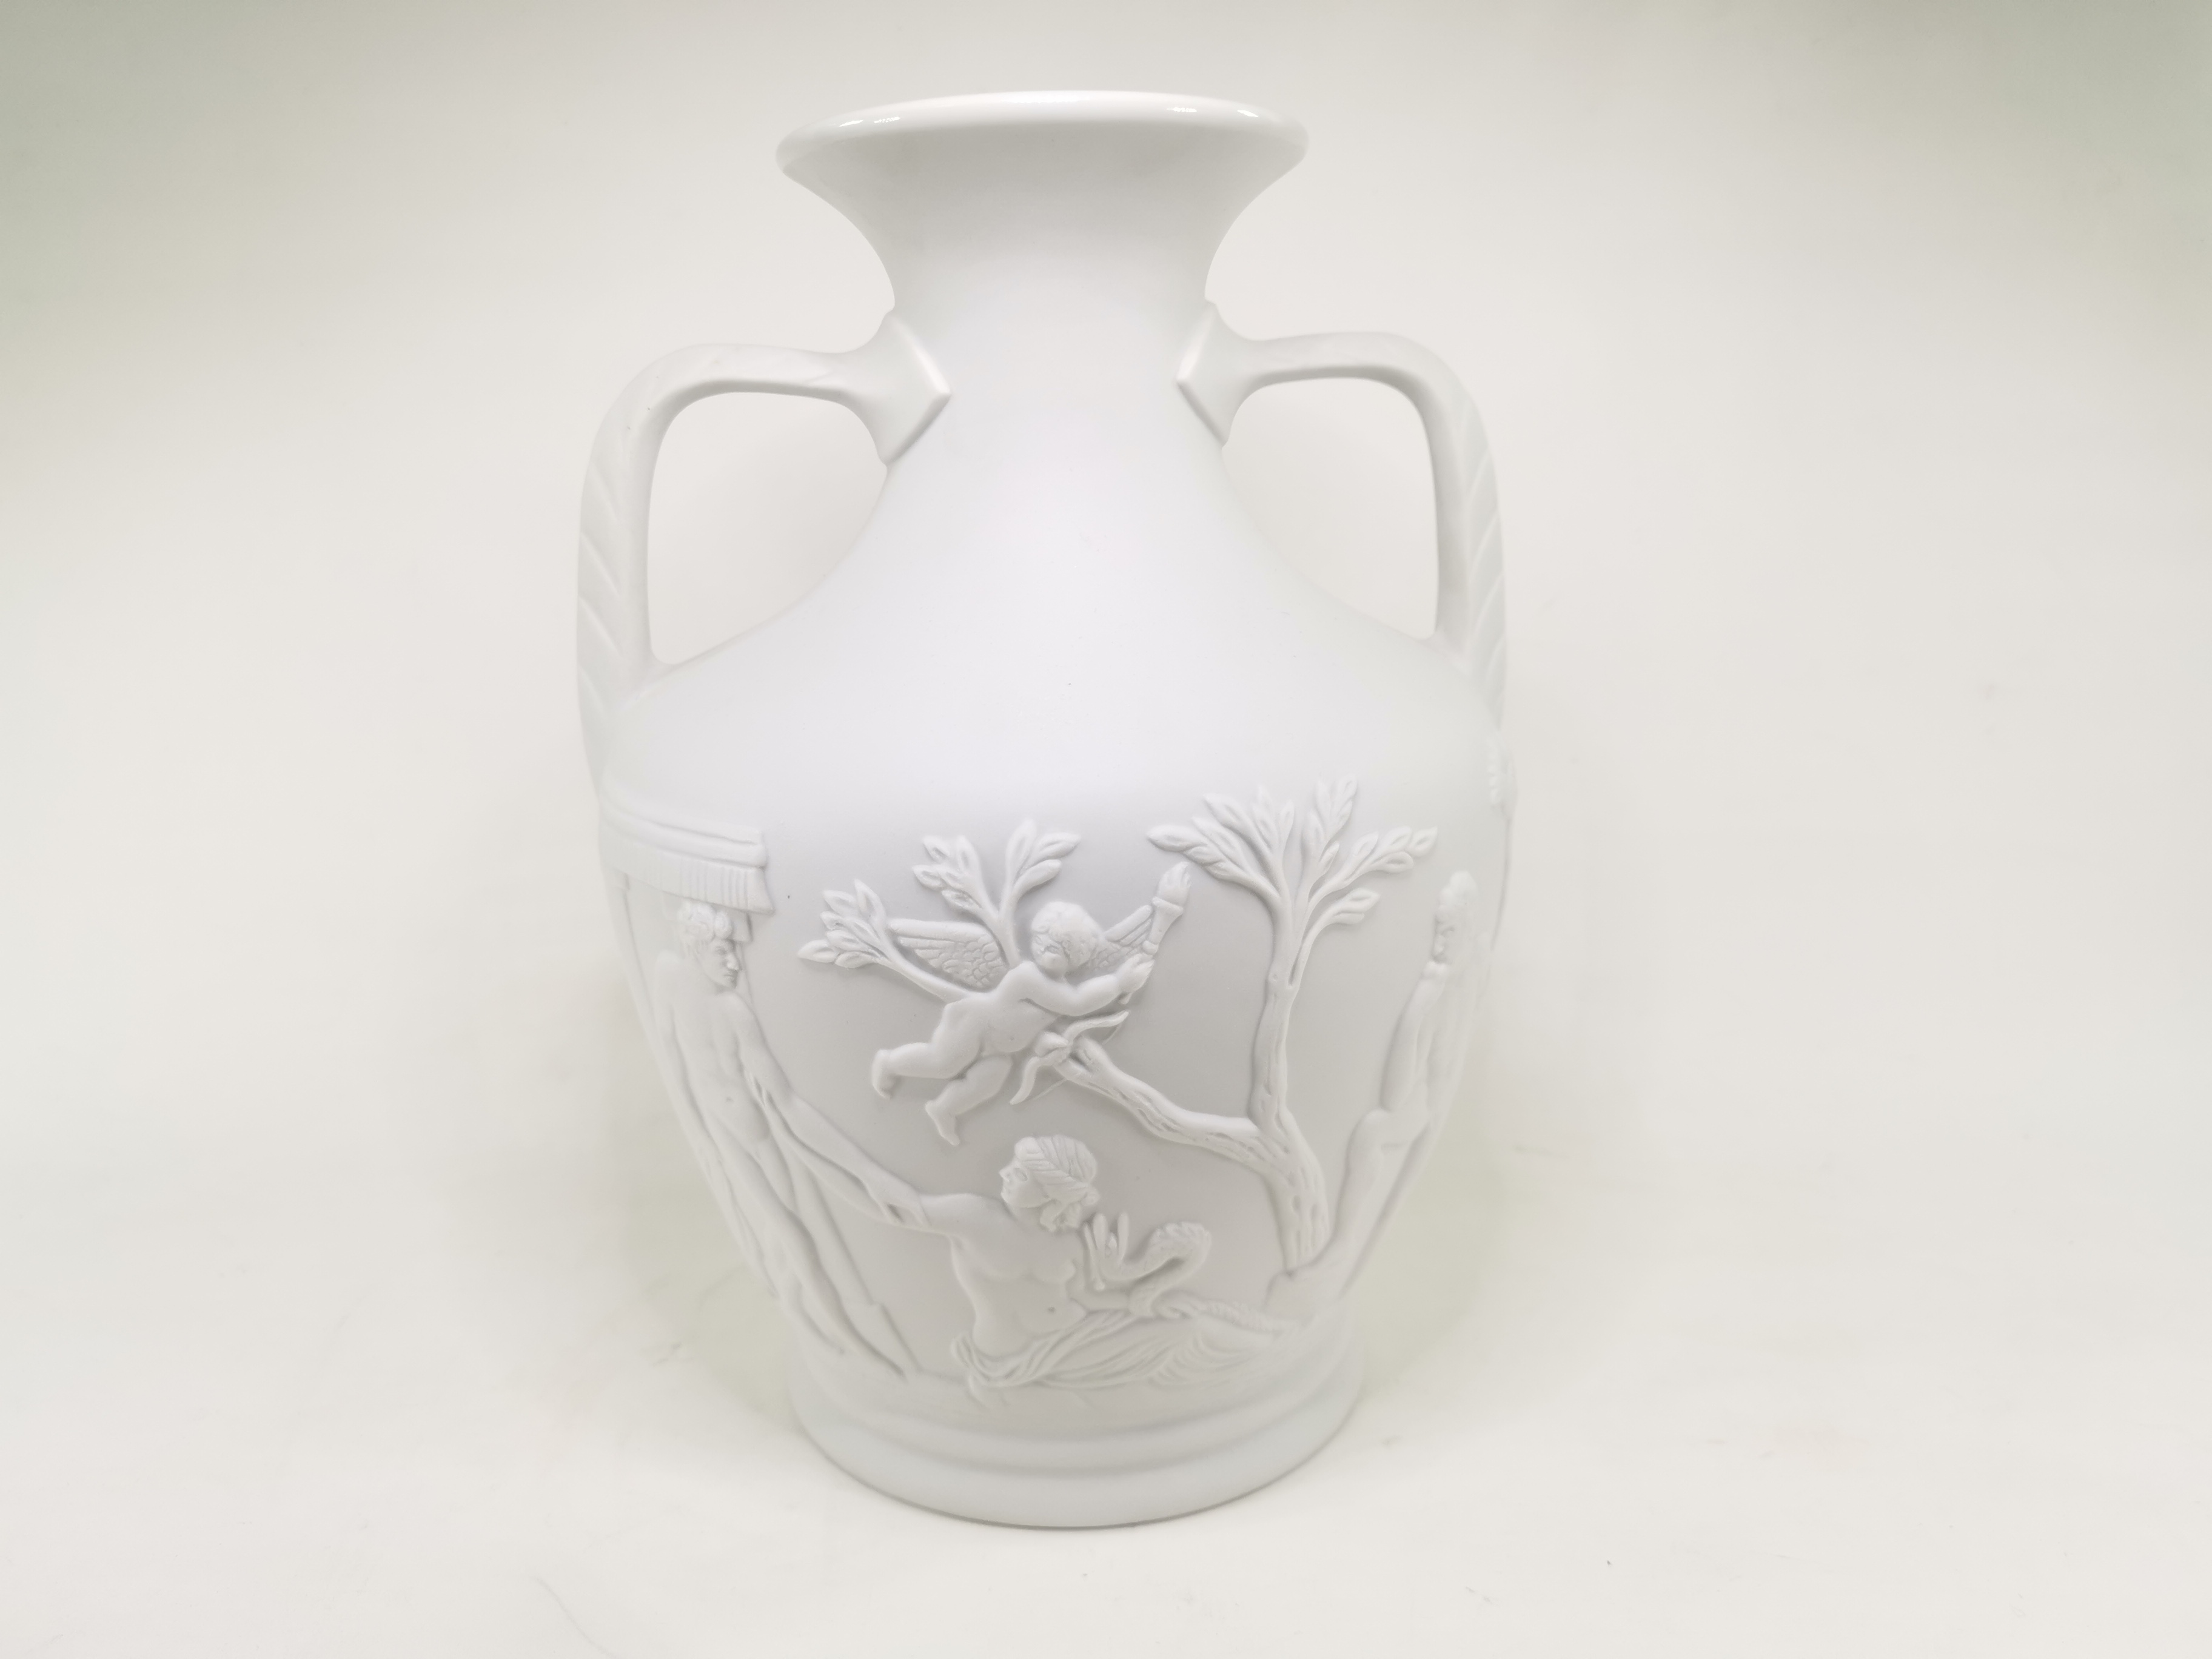 A Portmeirion bisque twin handled vase, after the 'Portland Vase', the ancient vessel excavated in - Image 8 of 18